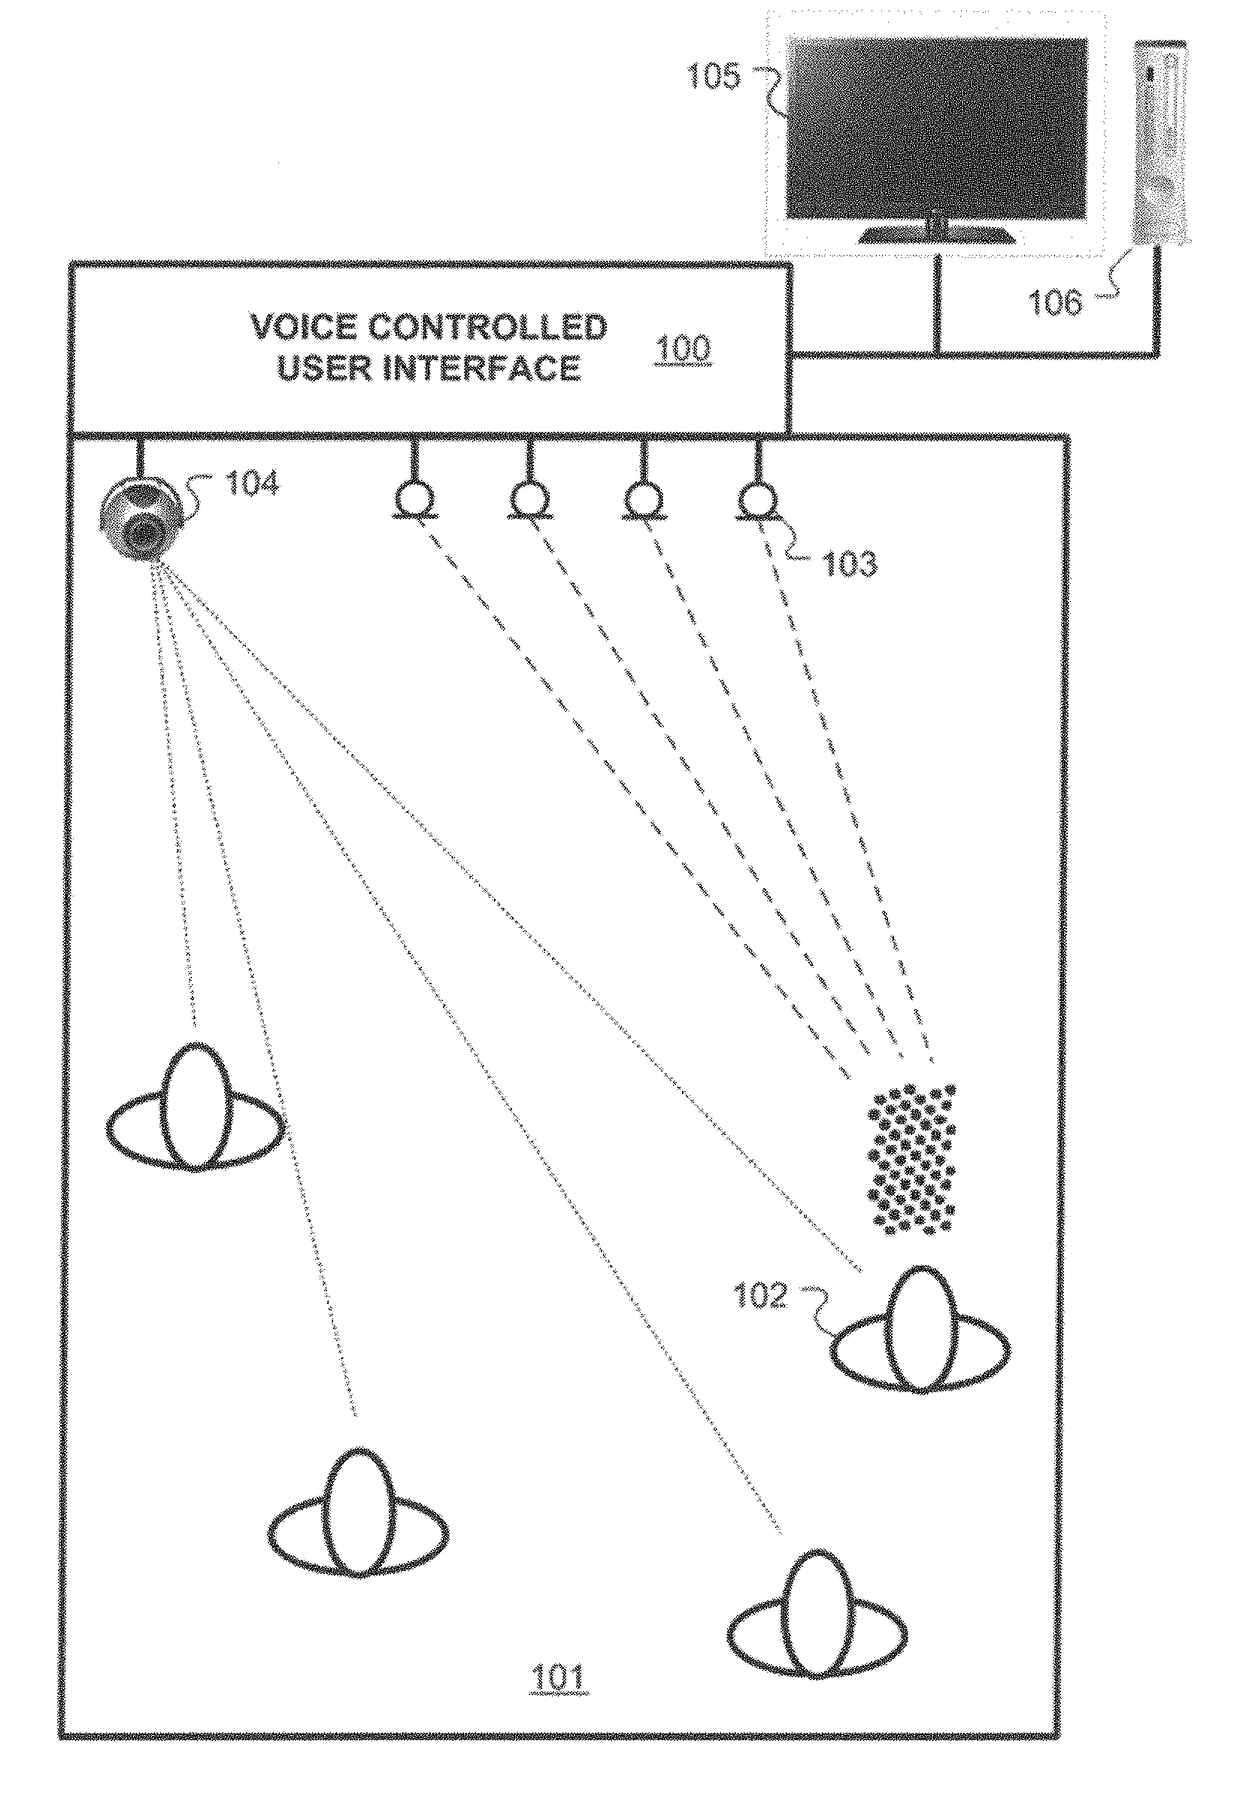 User Dedicated Automatic Speech Recognition